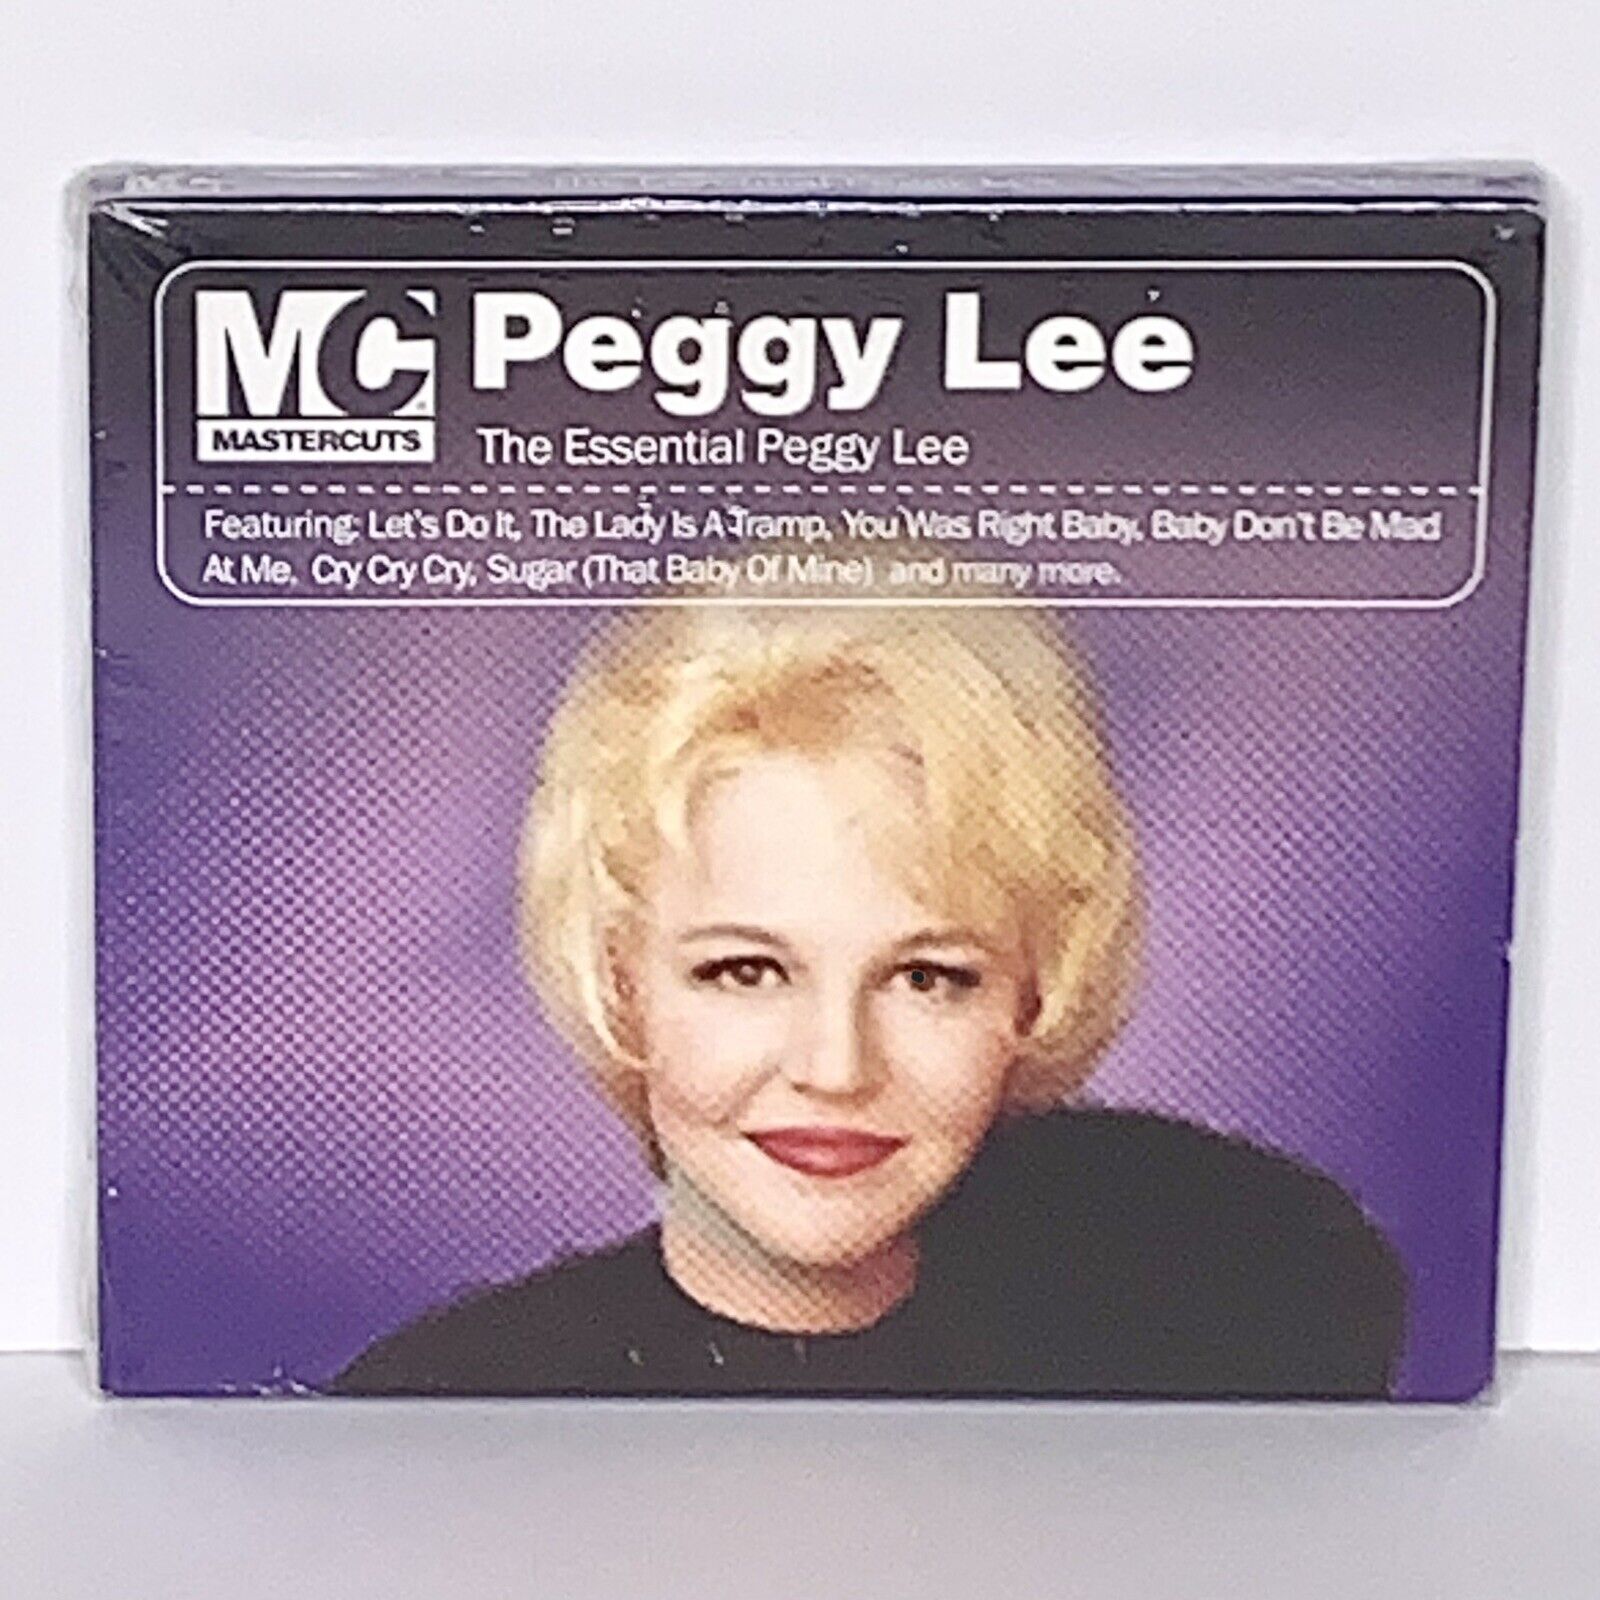 Factory Sealed (shrink wrapped) The Essential Peggy Lee CD